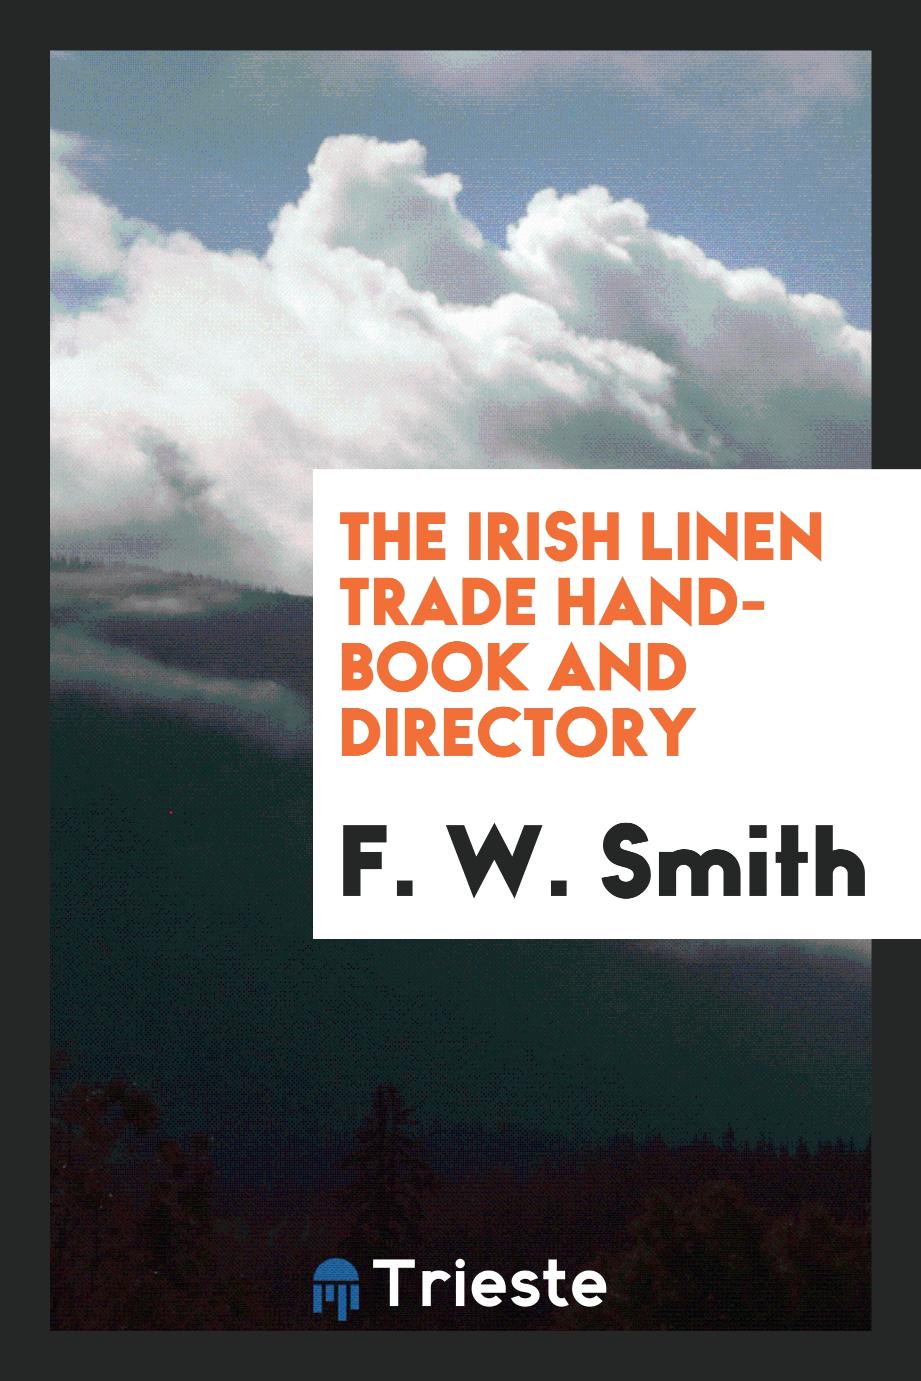 The Irish Linen Trade Hand-Book and Directory